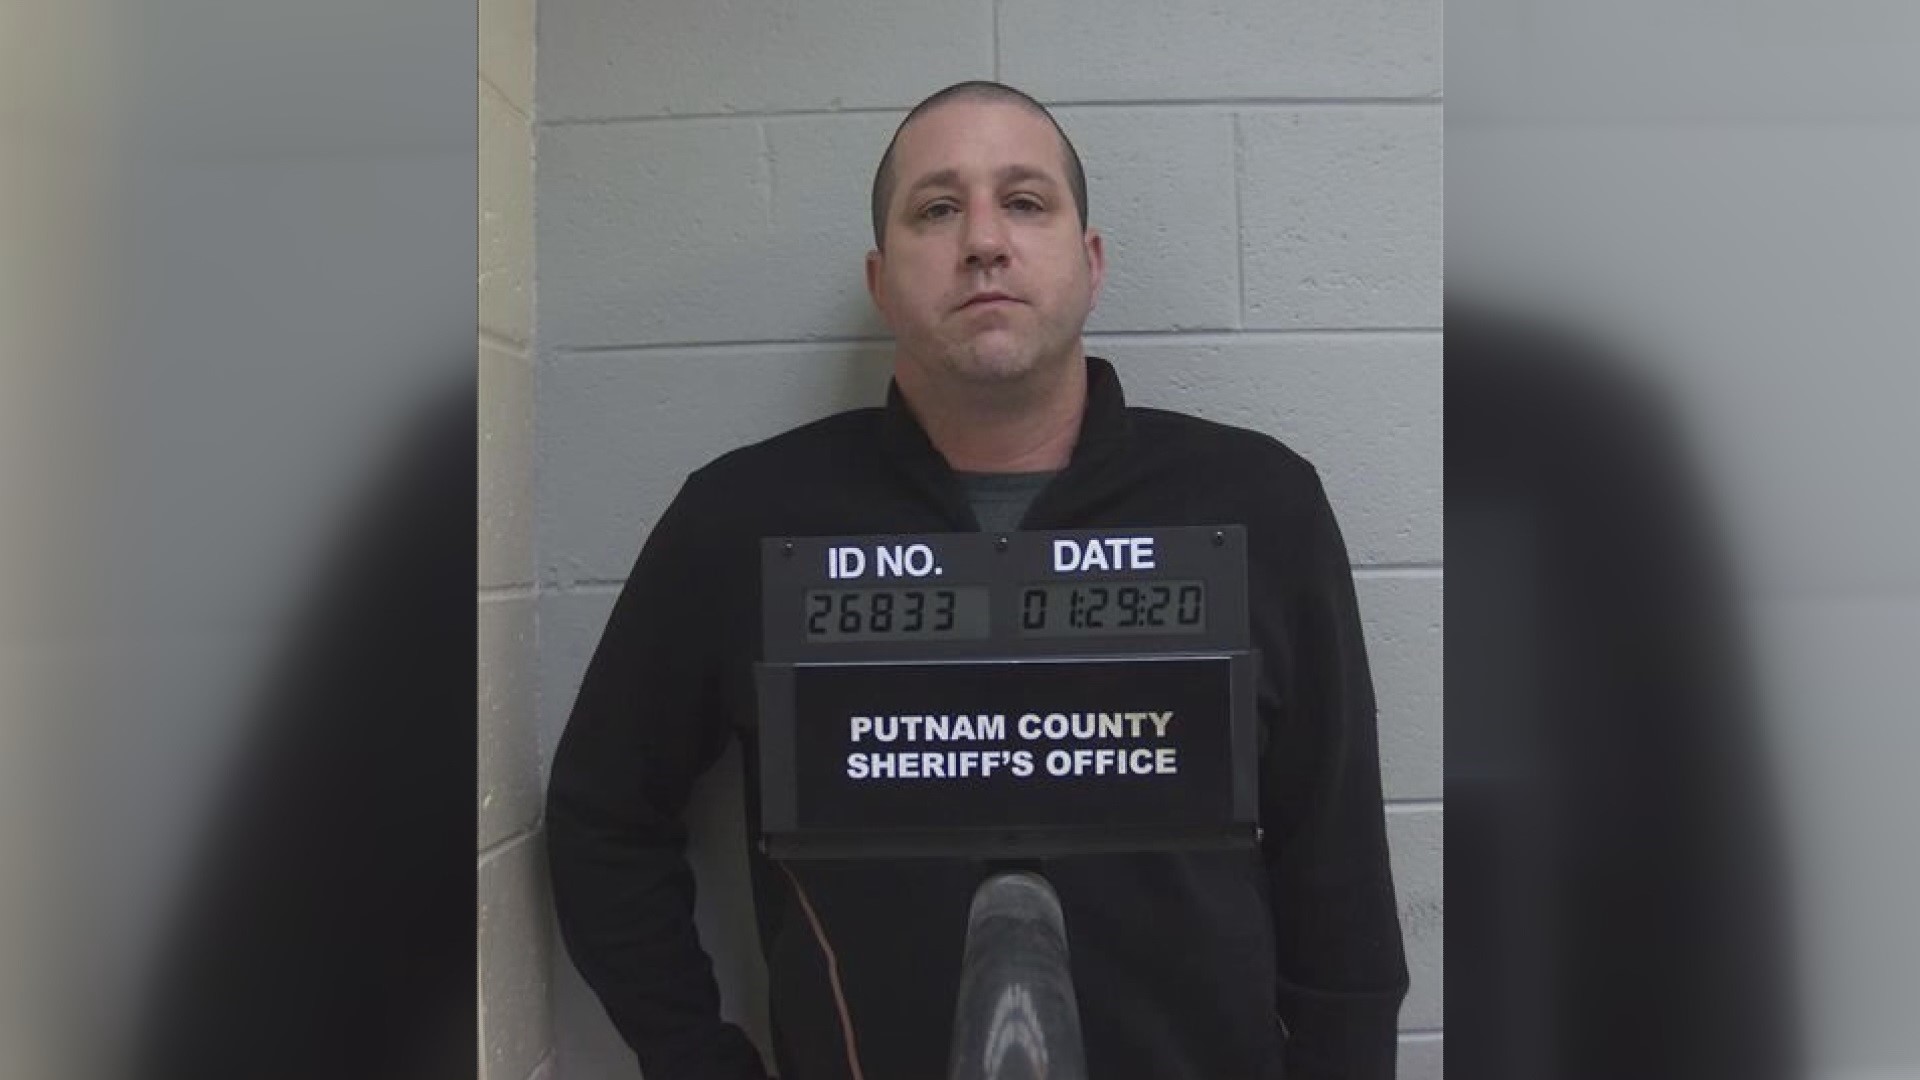 Putnam County Sheriff Howard Sills confirmed an Eatonton Police Officer, whose wife was found dead in their home on Monday, is charged with murder.